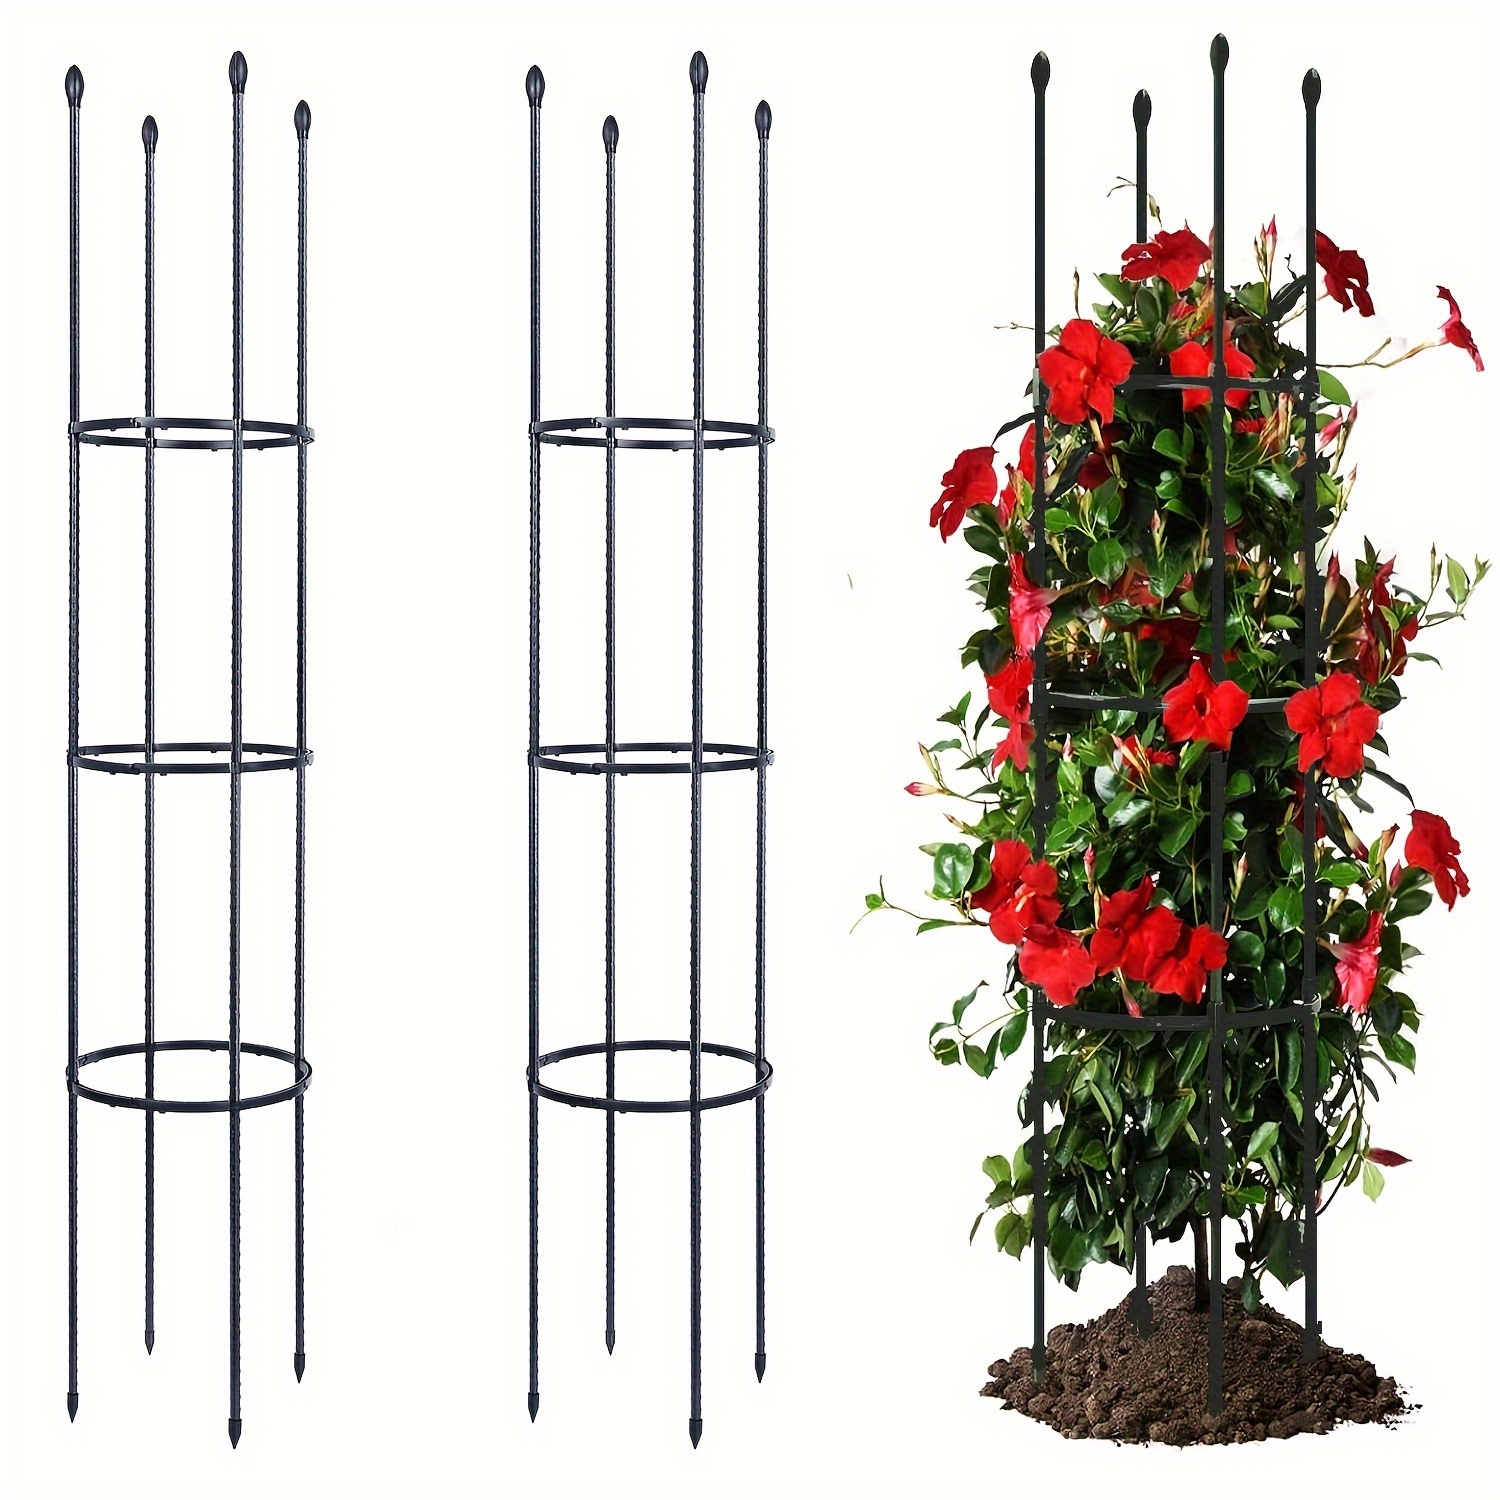 

1/2 Packs, Garden Trellis, Tomato Cage Tall Plant Support Climbing Vines Flowers Stands Cucumber Trellis Plant Cage & Supports For Vines, Vegetable, Flowers, Potted Plants